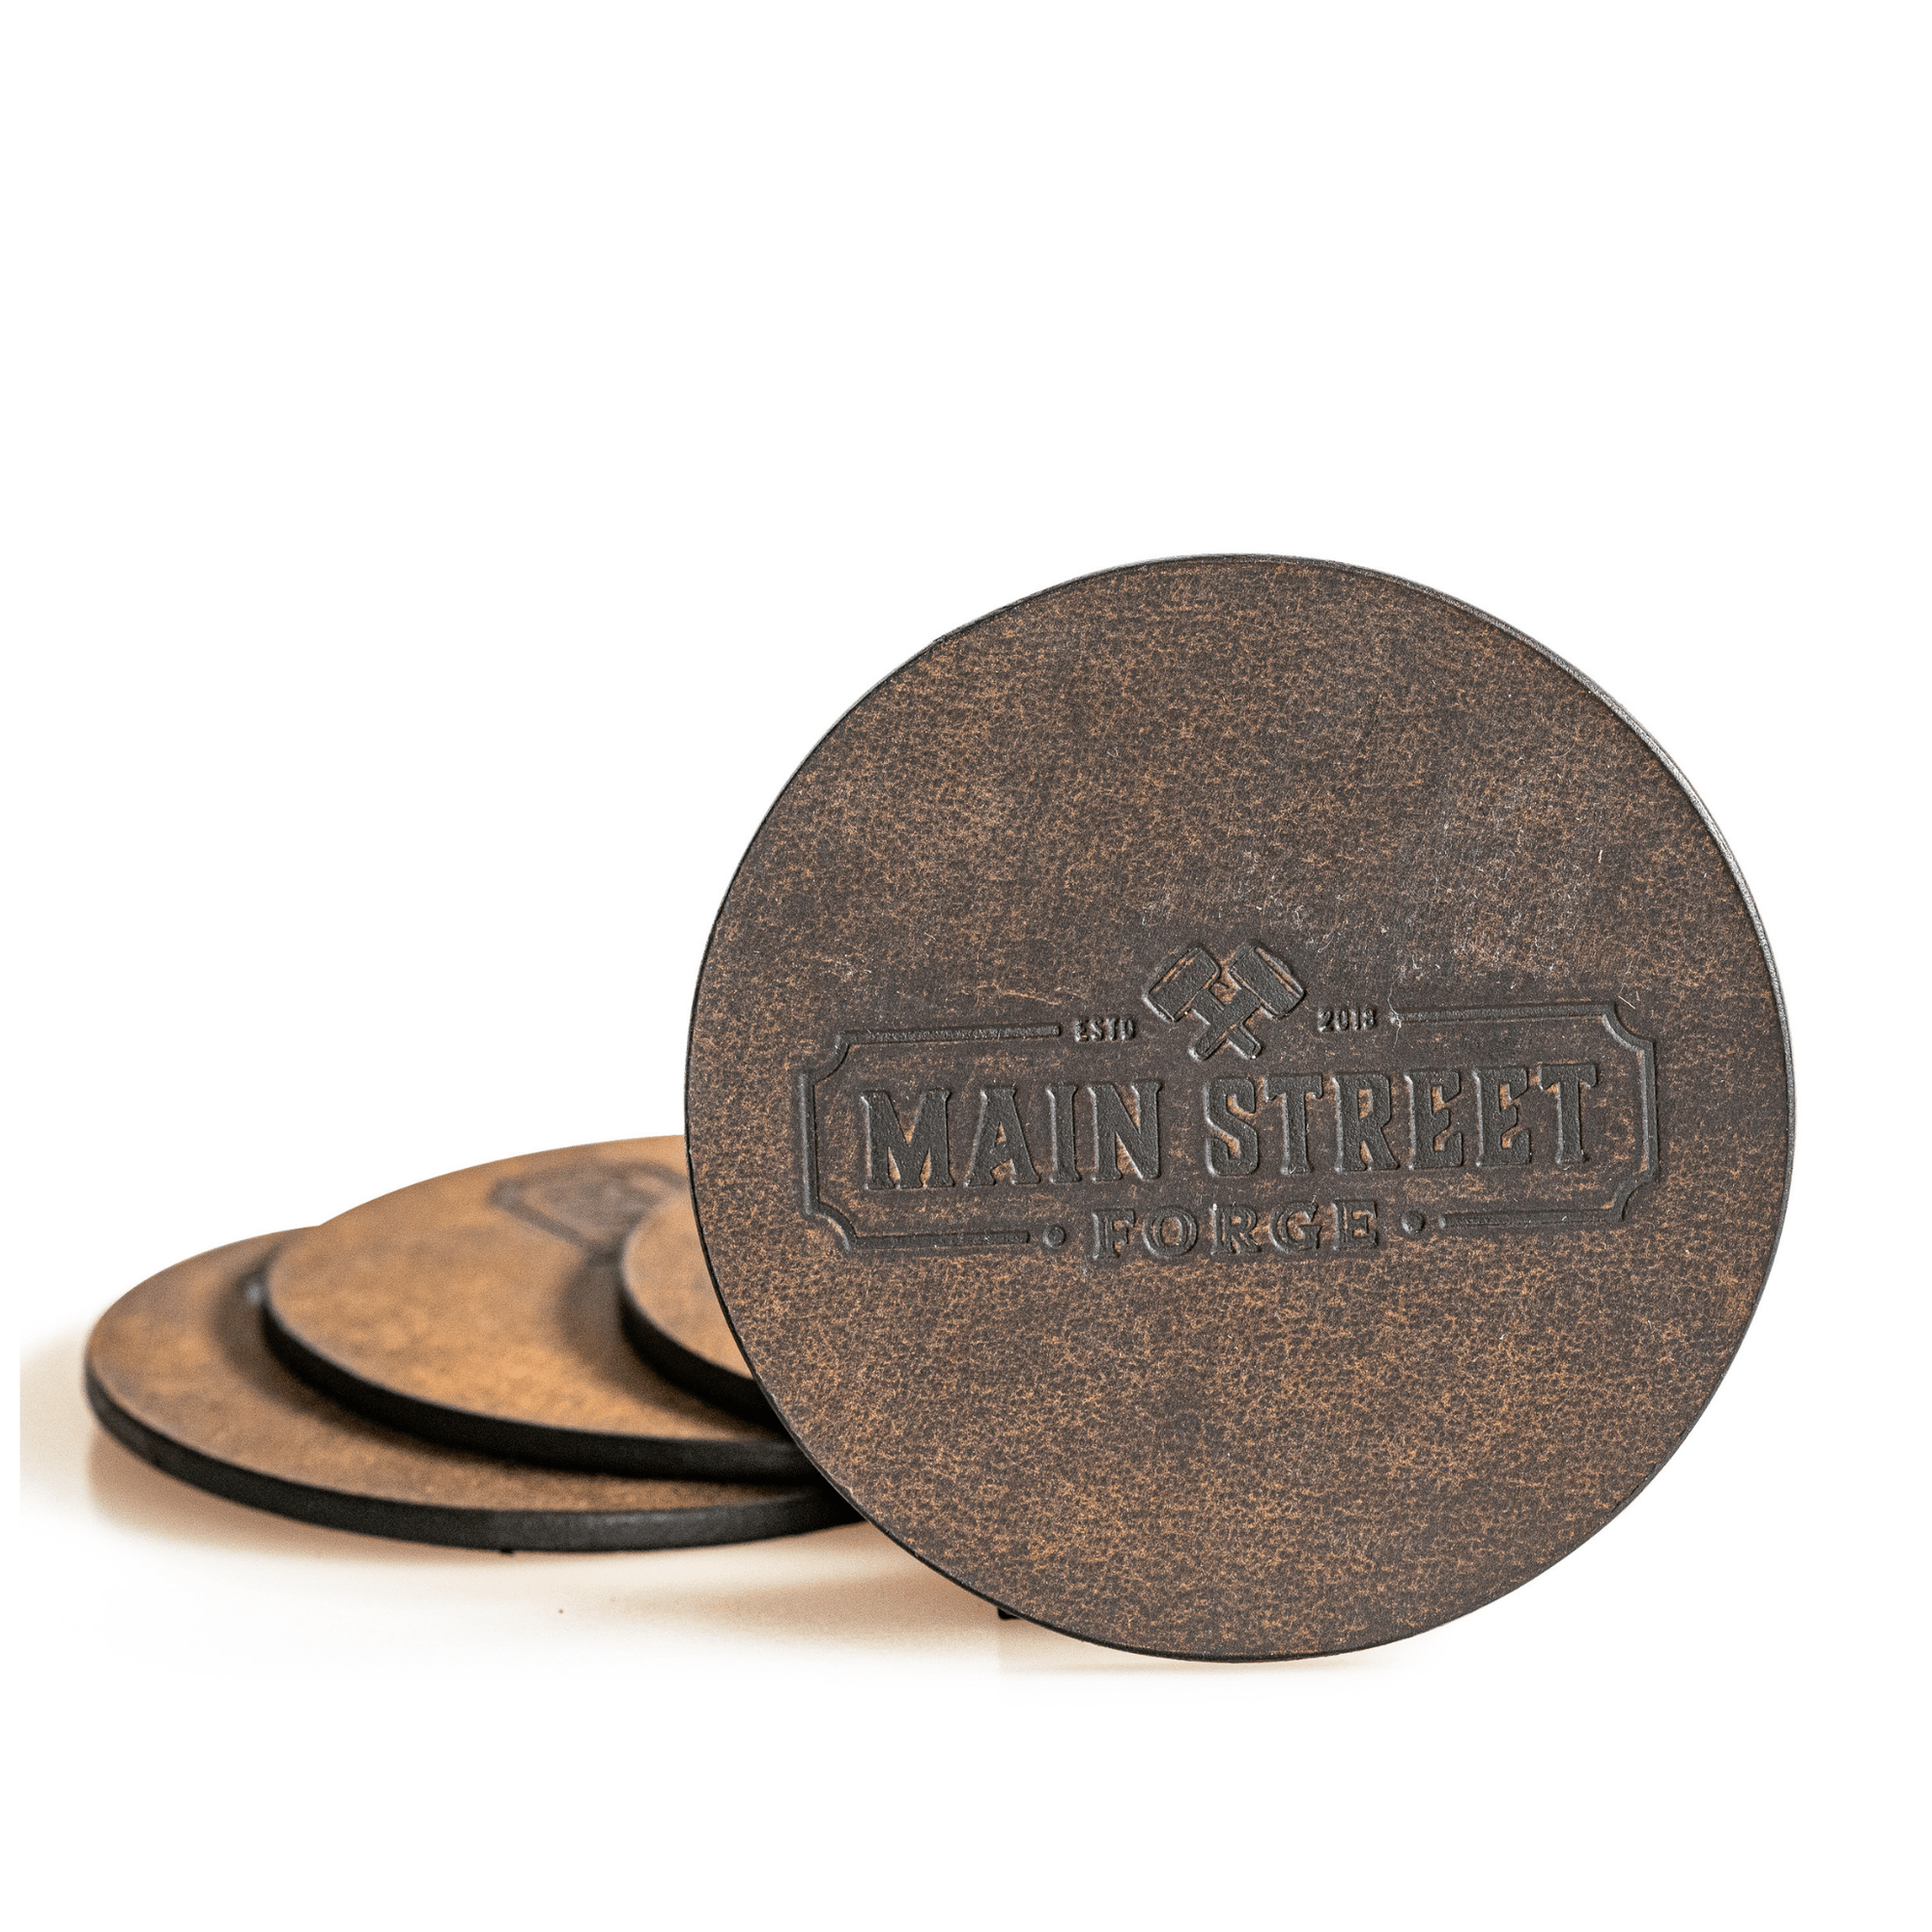 Main Street Forge Crazy Horse Leather Coaster Set with Tray - 4 Round Coasters for Drinks with Square Holder for Men - Hand Made in USA - Rustic Modern Design Great for Coffee Table, Bar, Kitchen, Dining Room 816895023259